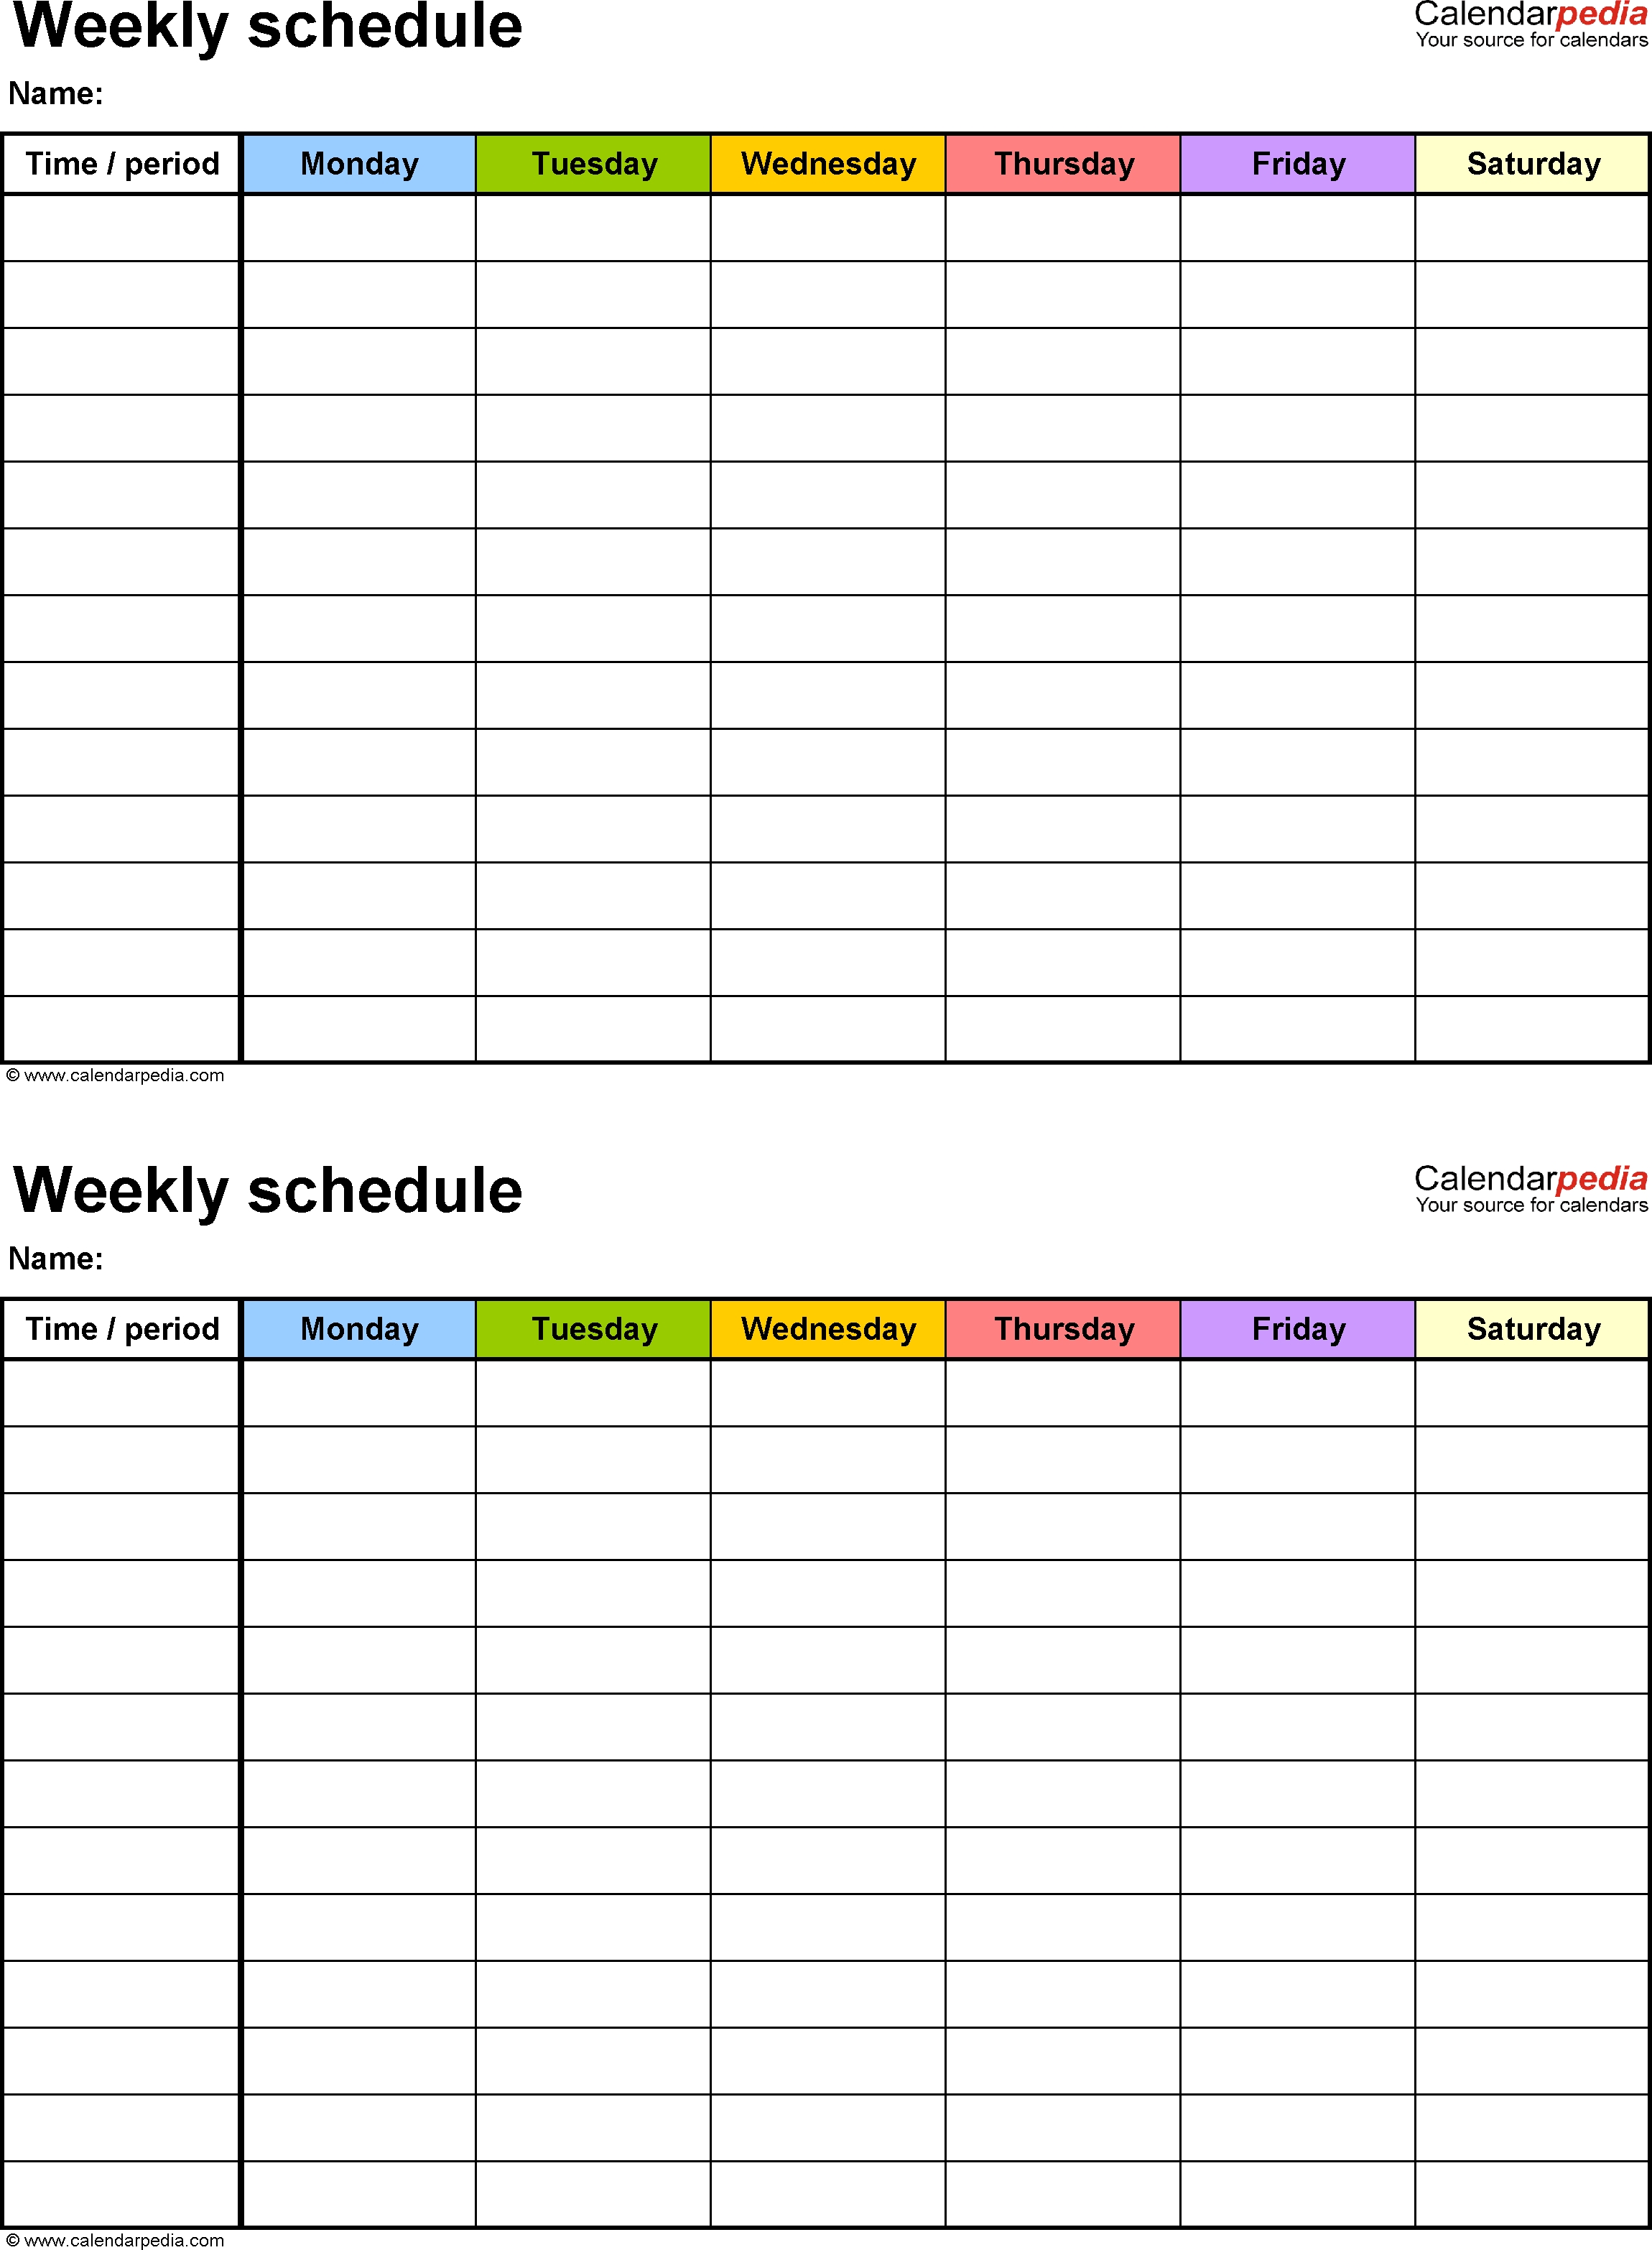 Free Weekly Schedule Templates For Excel - 18 Templates within Monday To Friday Timetable Excel